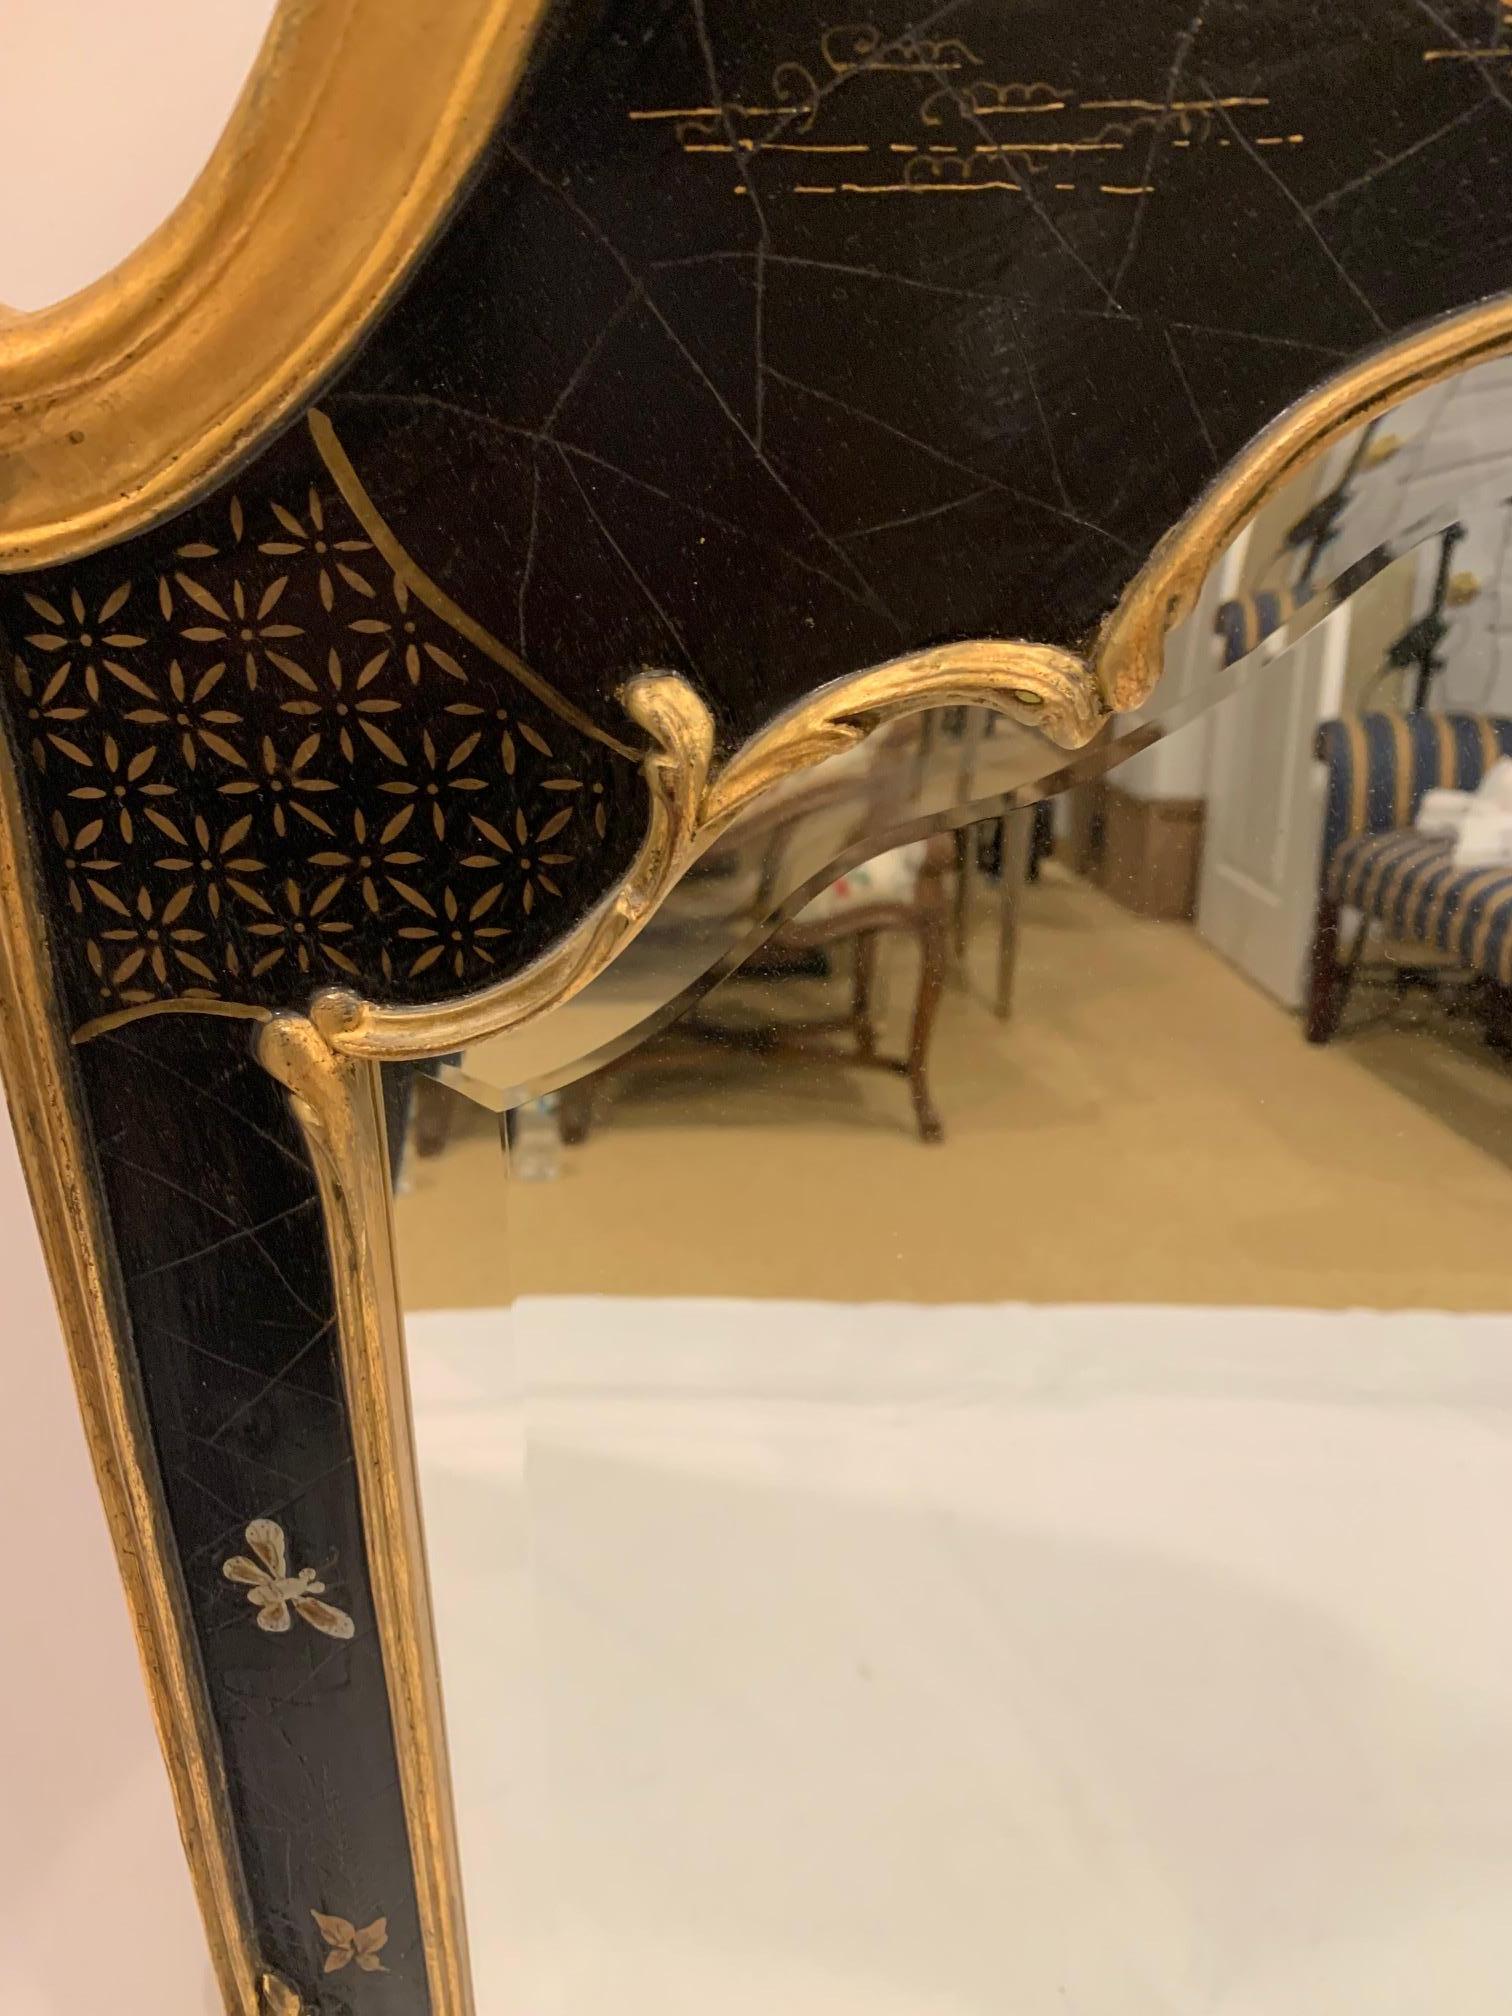 Strikingly elegant chinoiserie style wall mirror having gold leaf and hand painted frame. The black background offsets the figures and pagodas in primary colors of red, green and blue. The ornately gilded scalloped top is especially beautiful. And